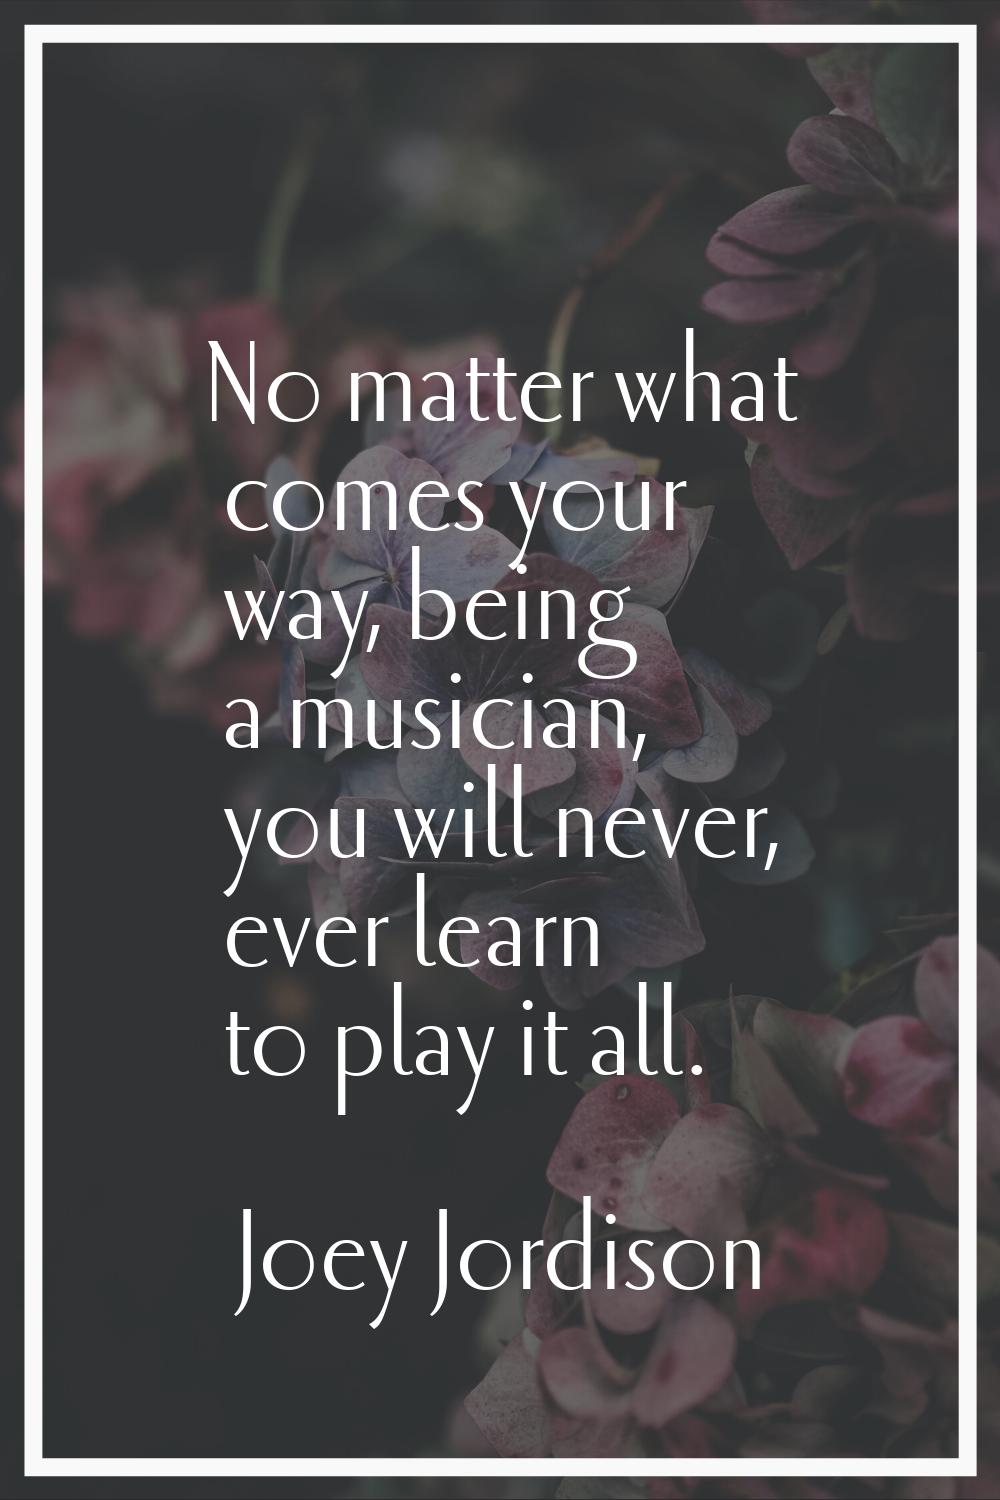 No matter what comes your way, being a musician, you will never, ever learn to play it all.